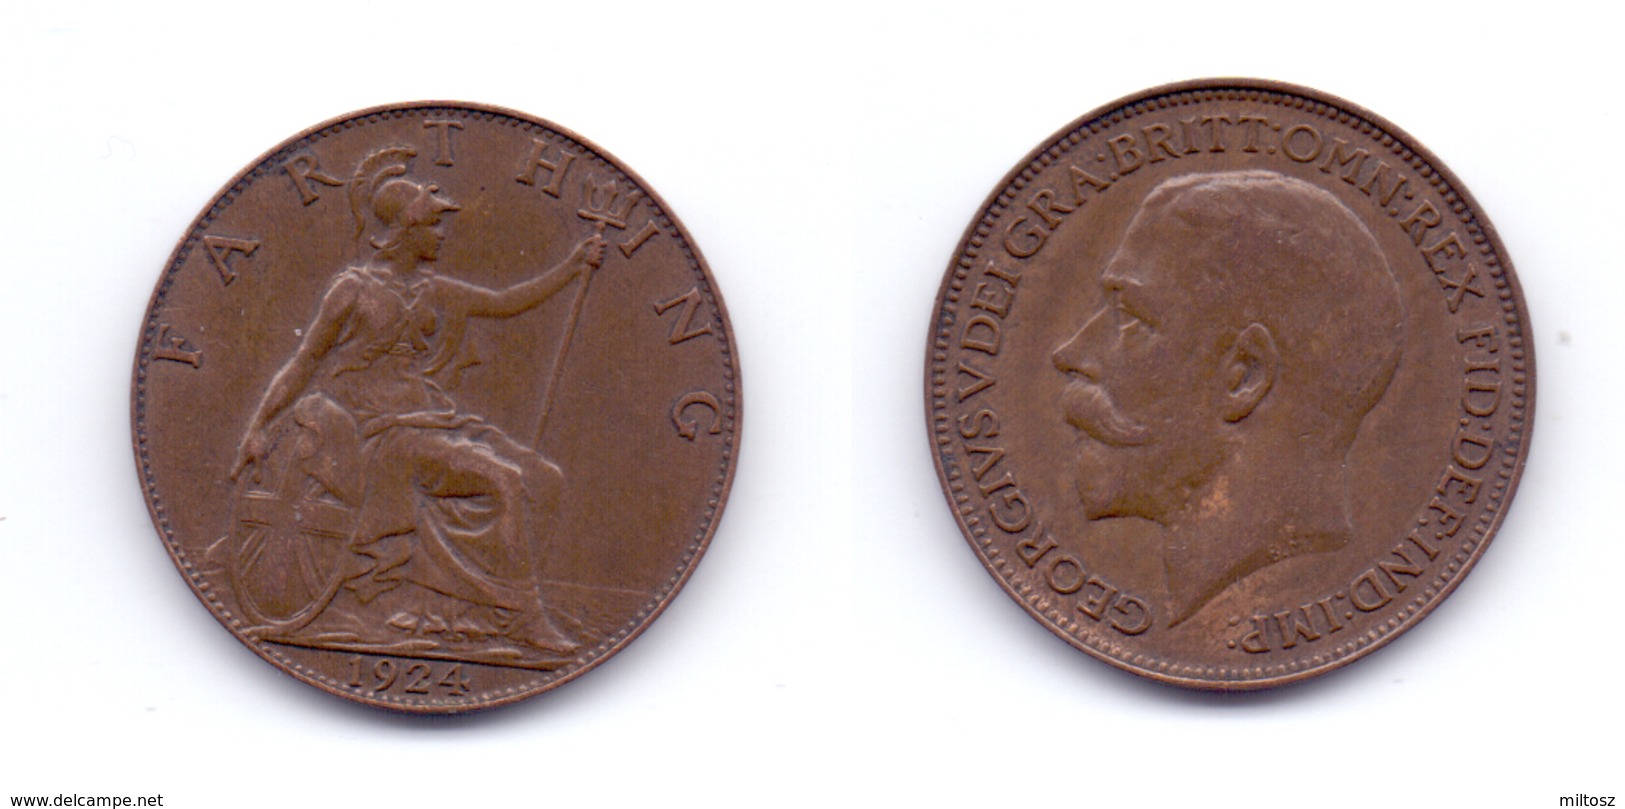 Great Britain 1/4 Penny 1924 - B. 1 Farthing